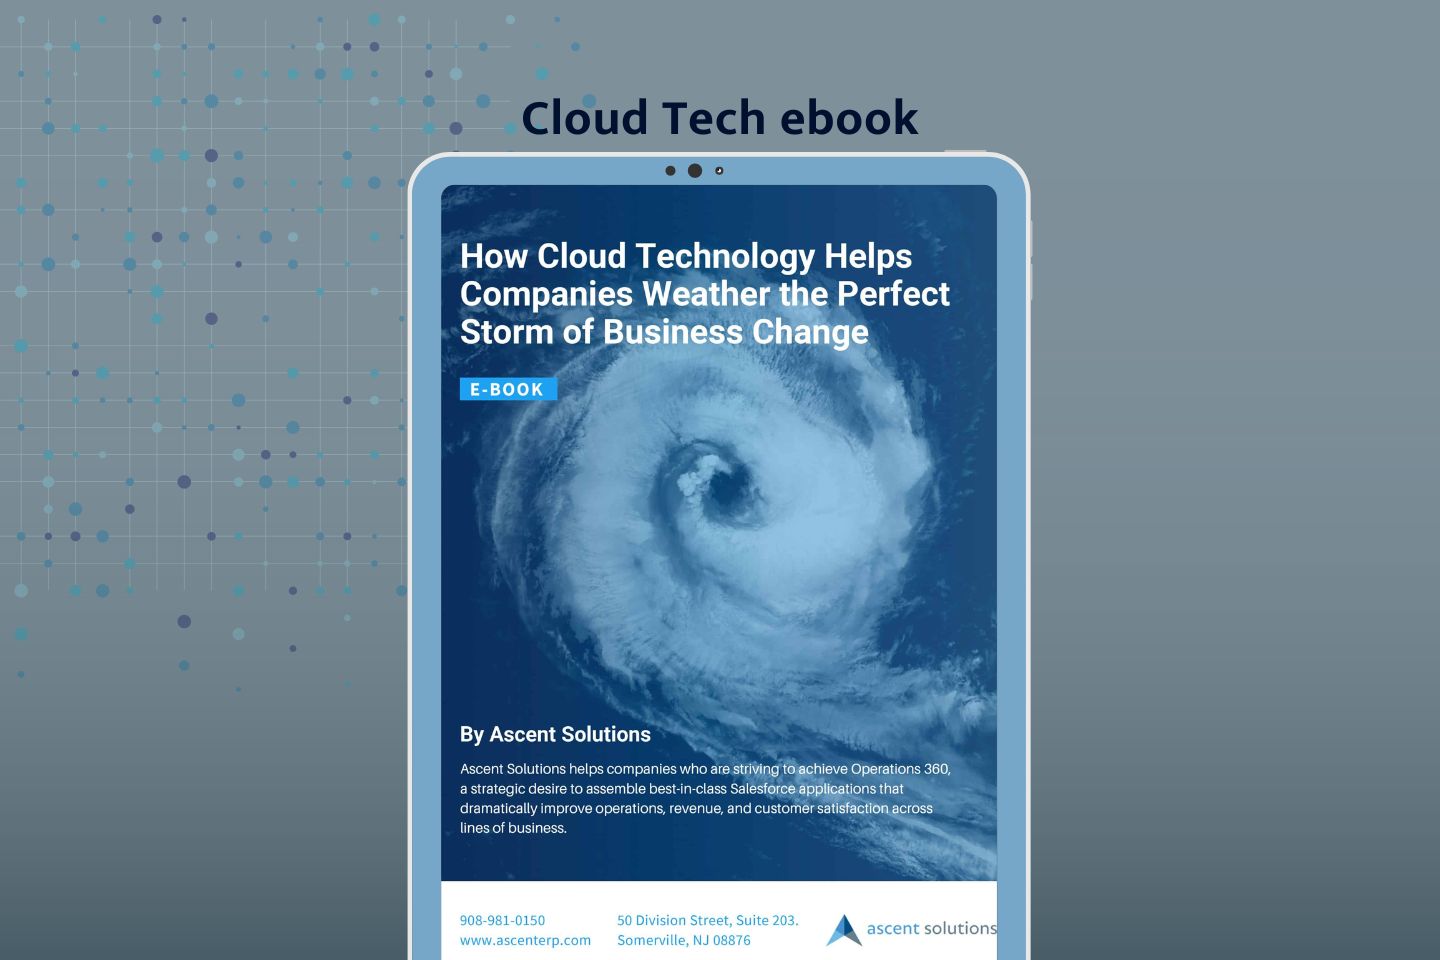 How Cloud Technology Helps Companies Weather the Perfect Storm of Business Change